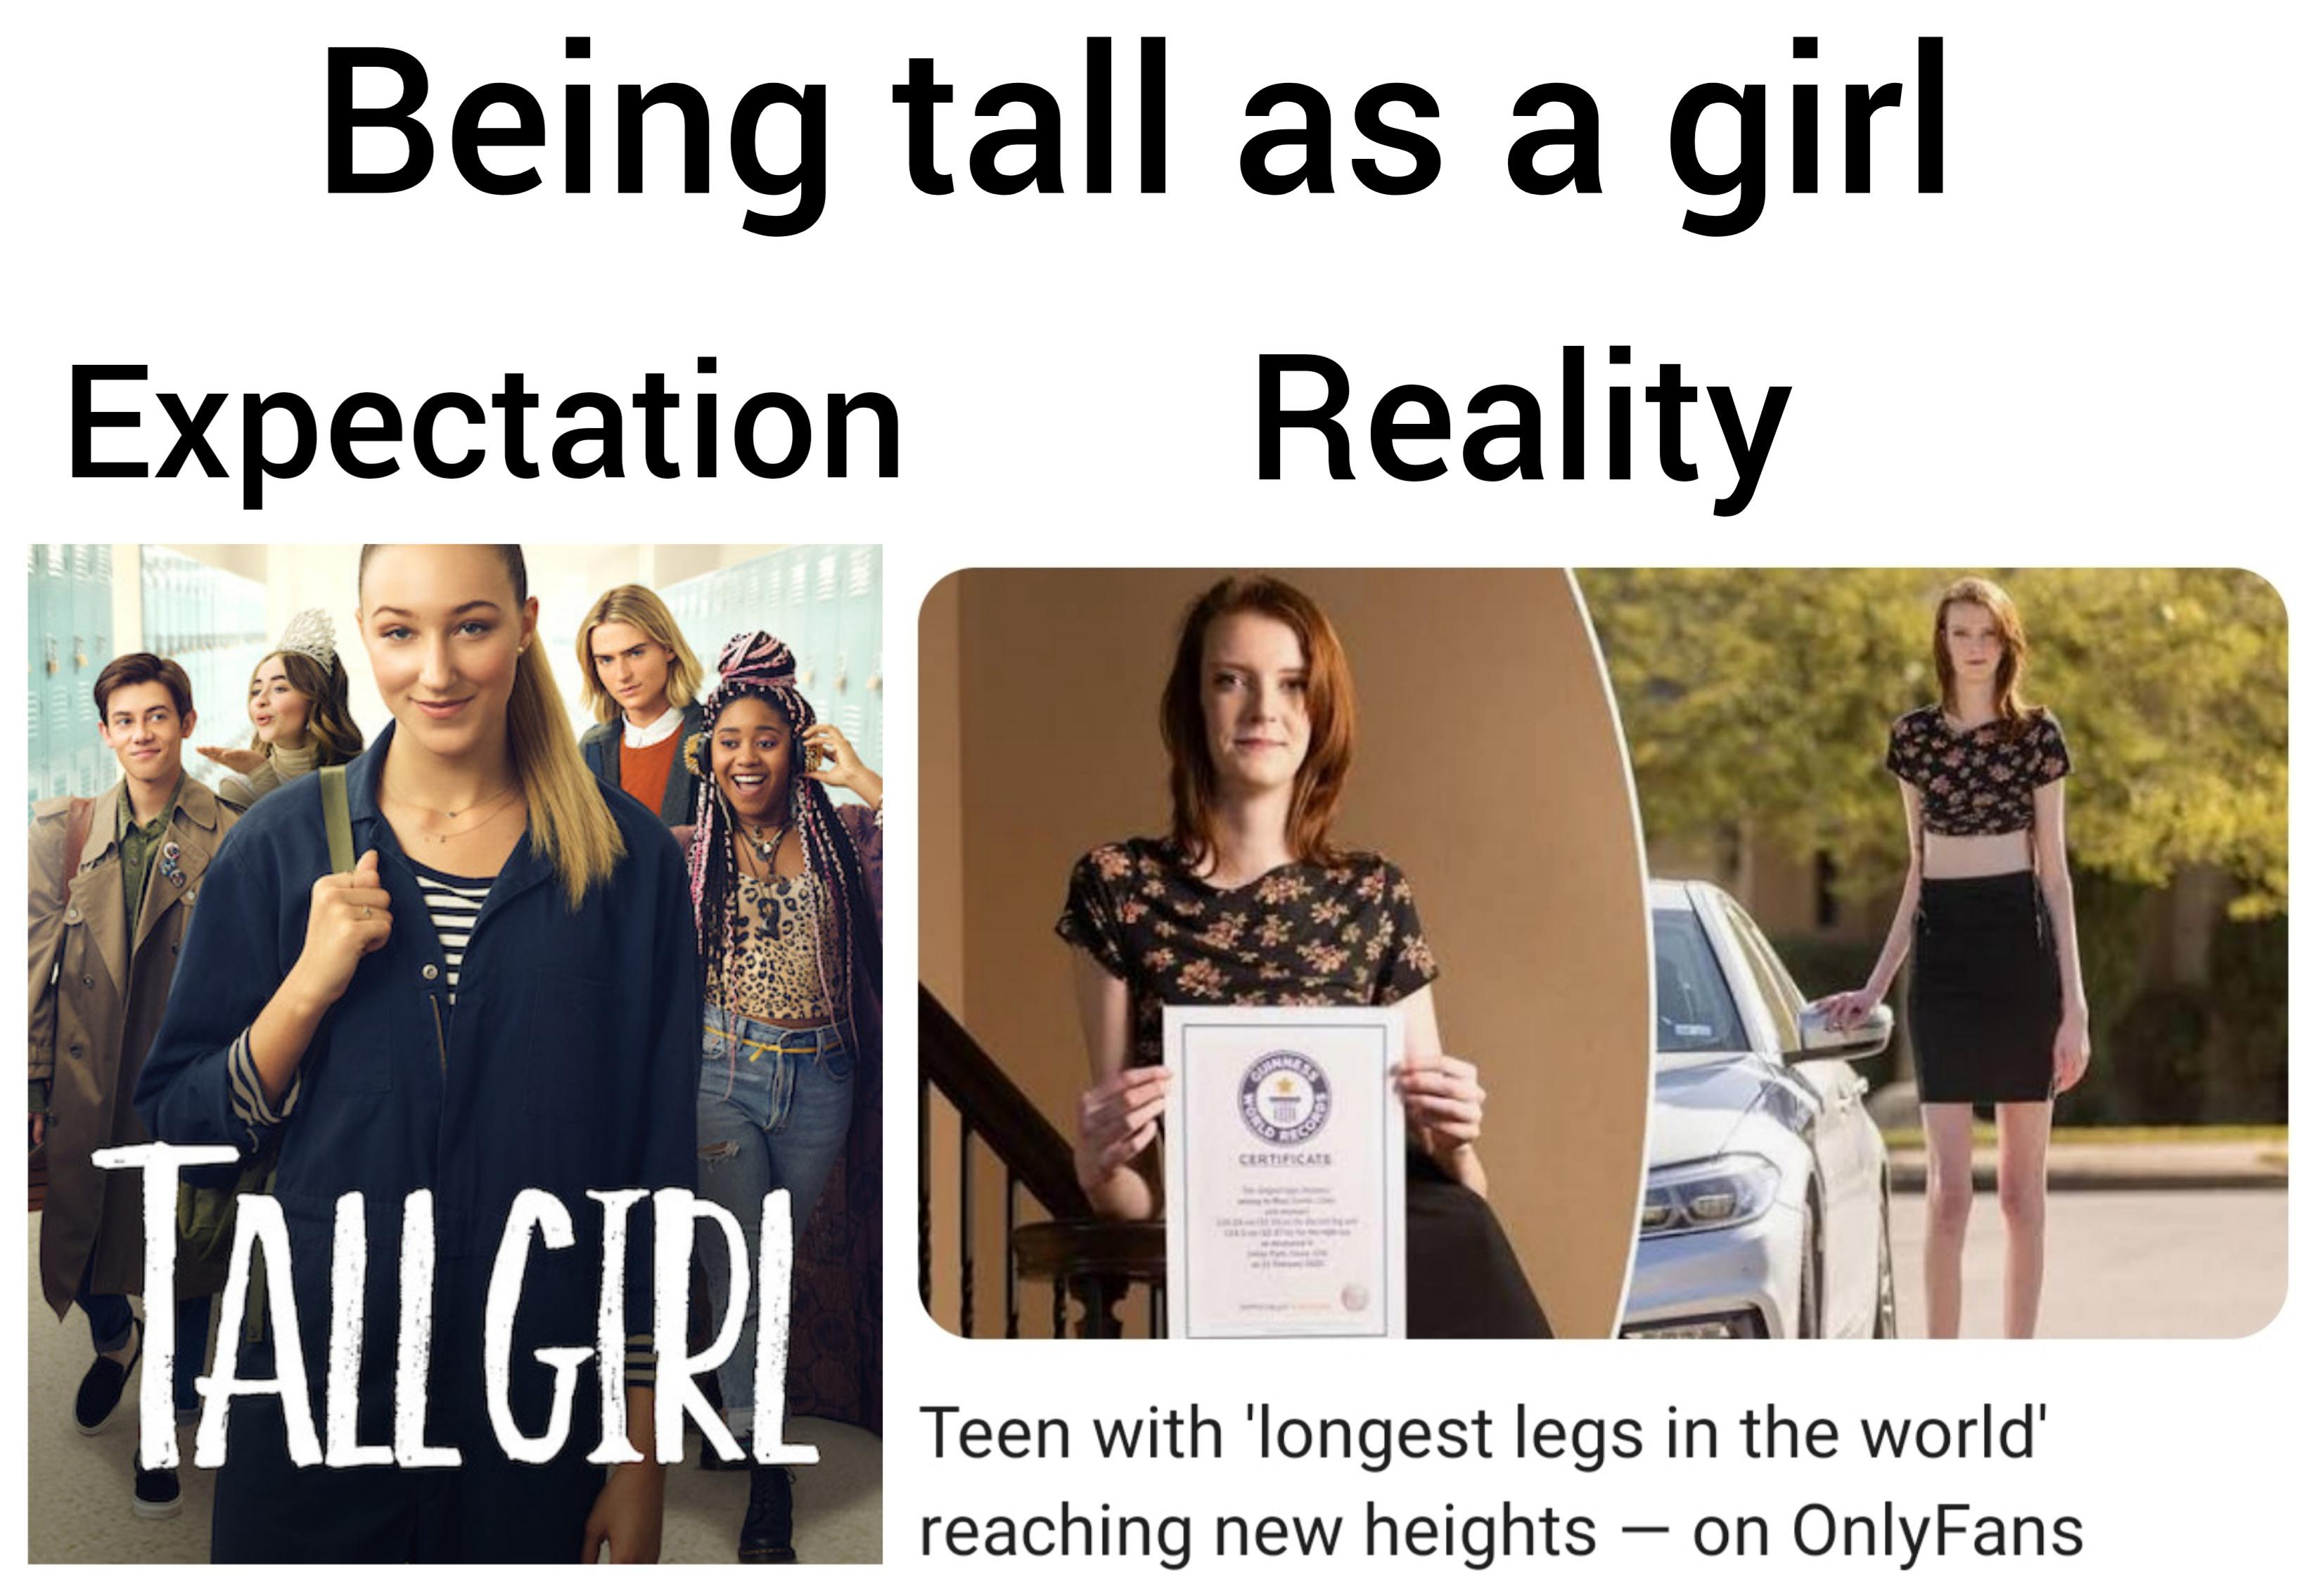 funny memes - dank memes - media - Being tall as a girl Reality Teen with 'longest legs in the world' reaching new heights on OnlyFans Expectation Tall Girl